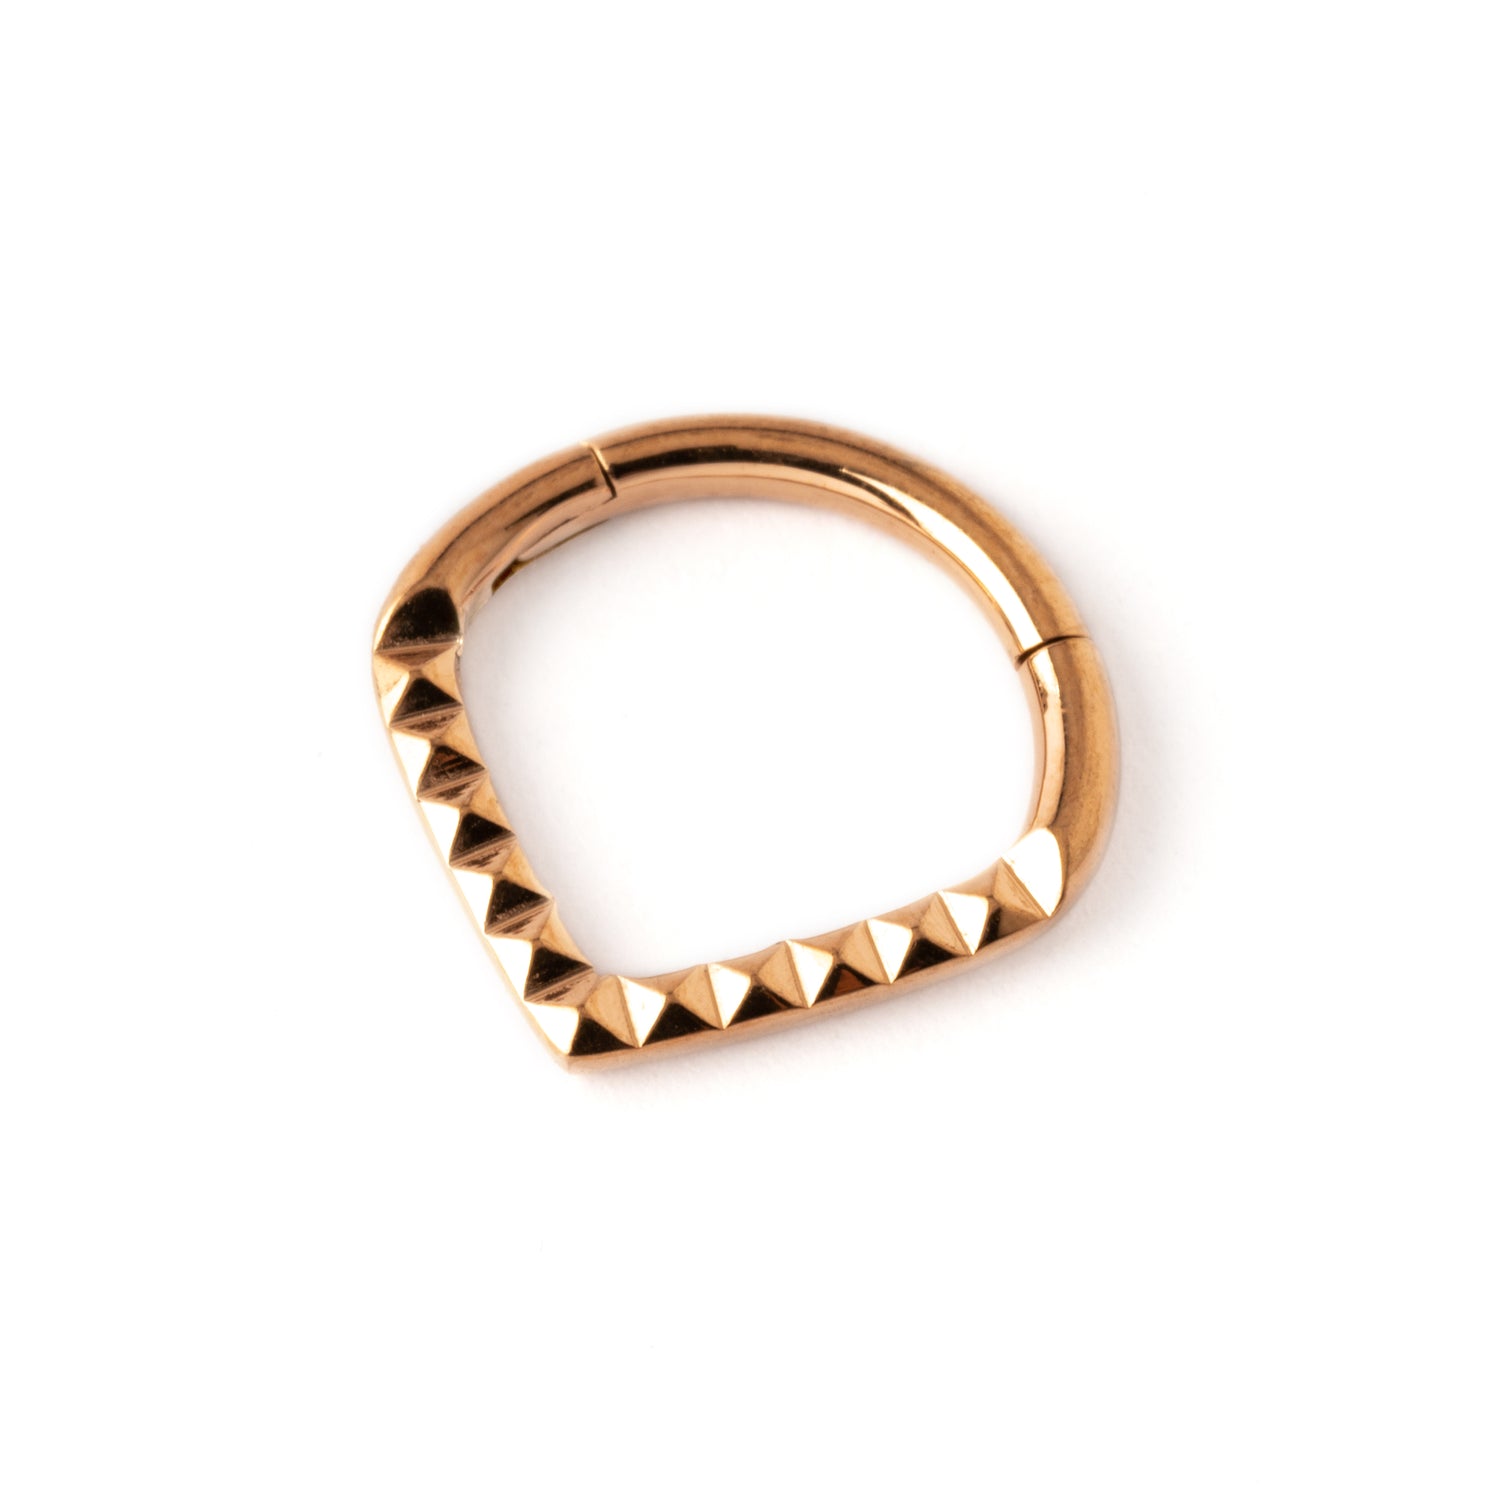 Giza rose gold surgical steel teardrop shaped septum clicker right side view